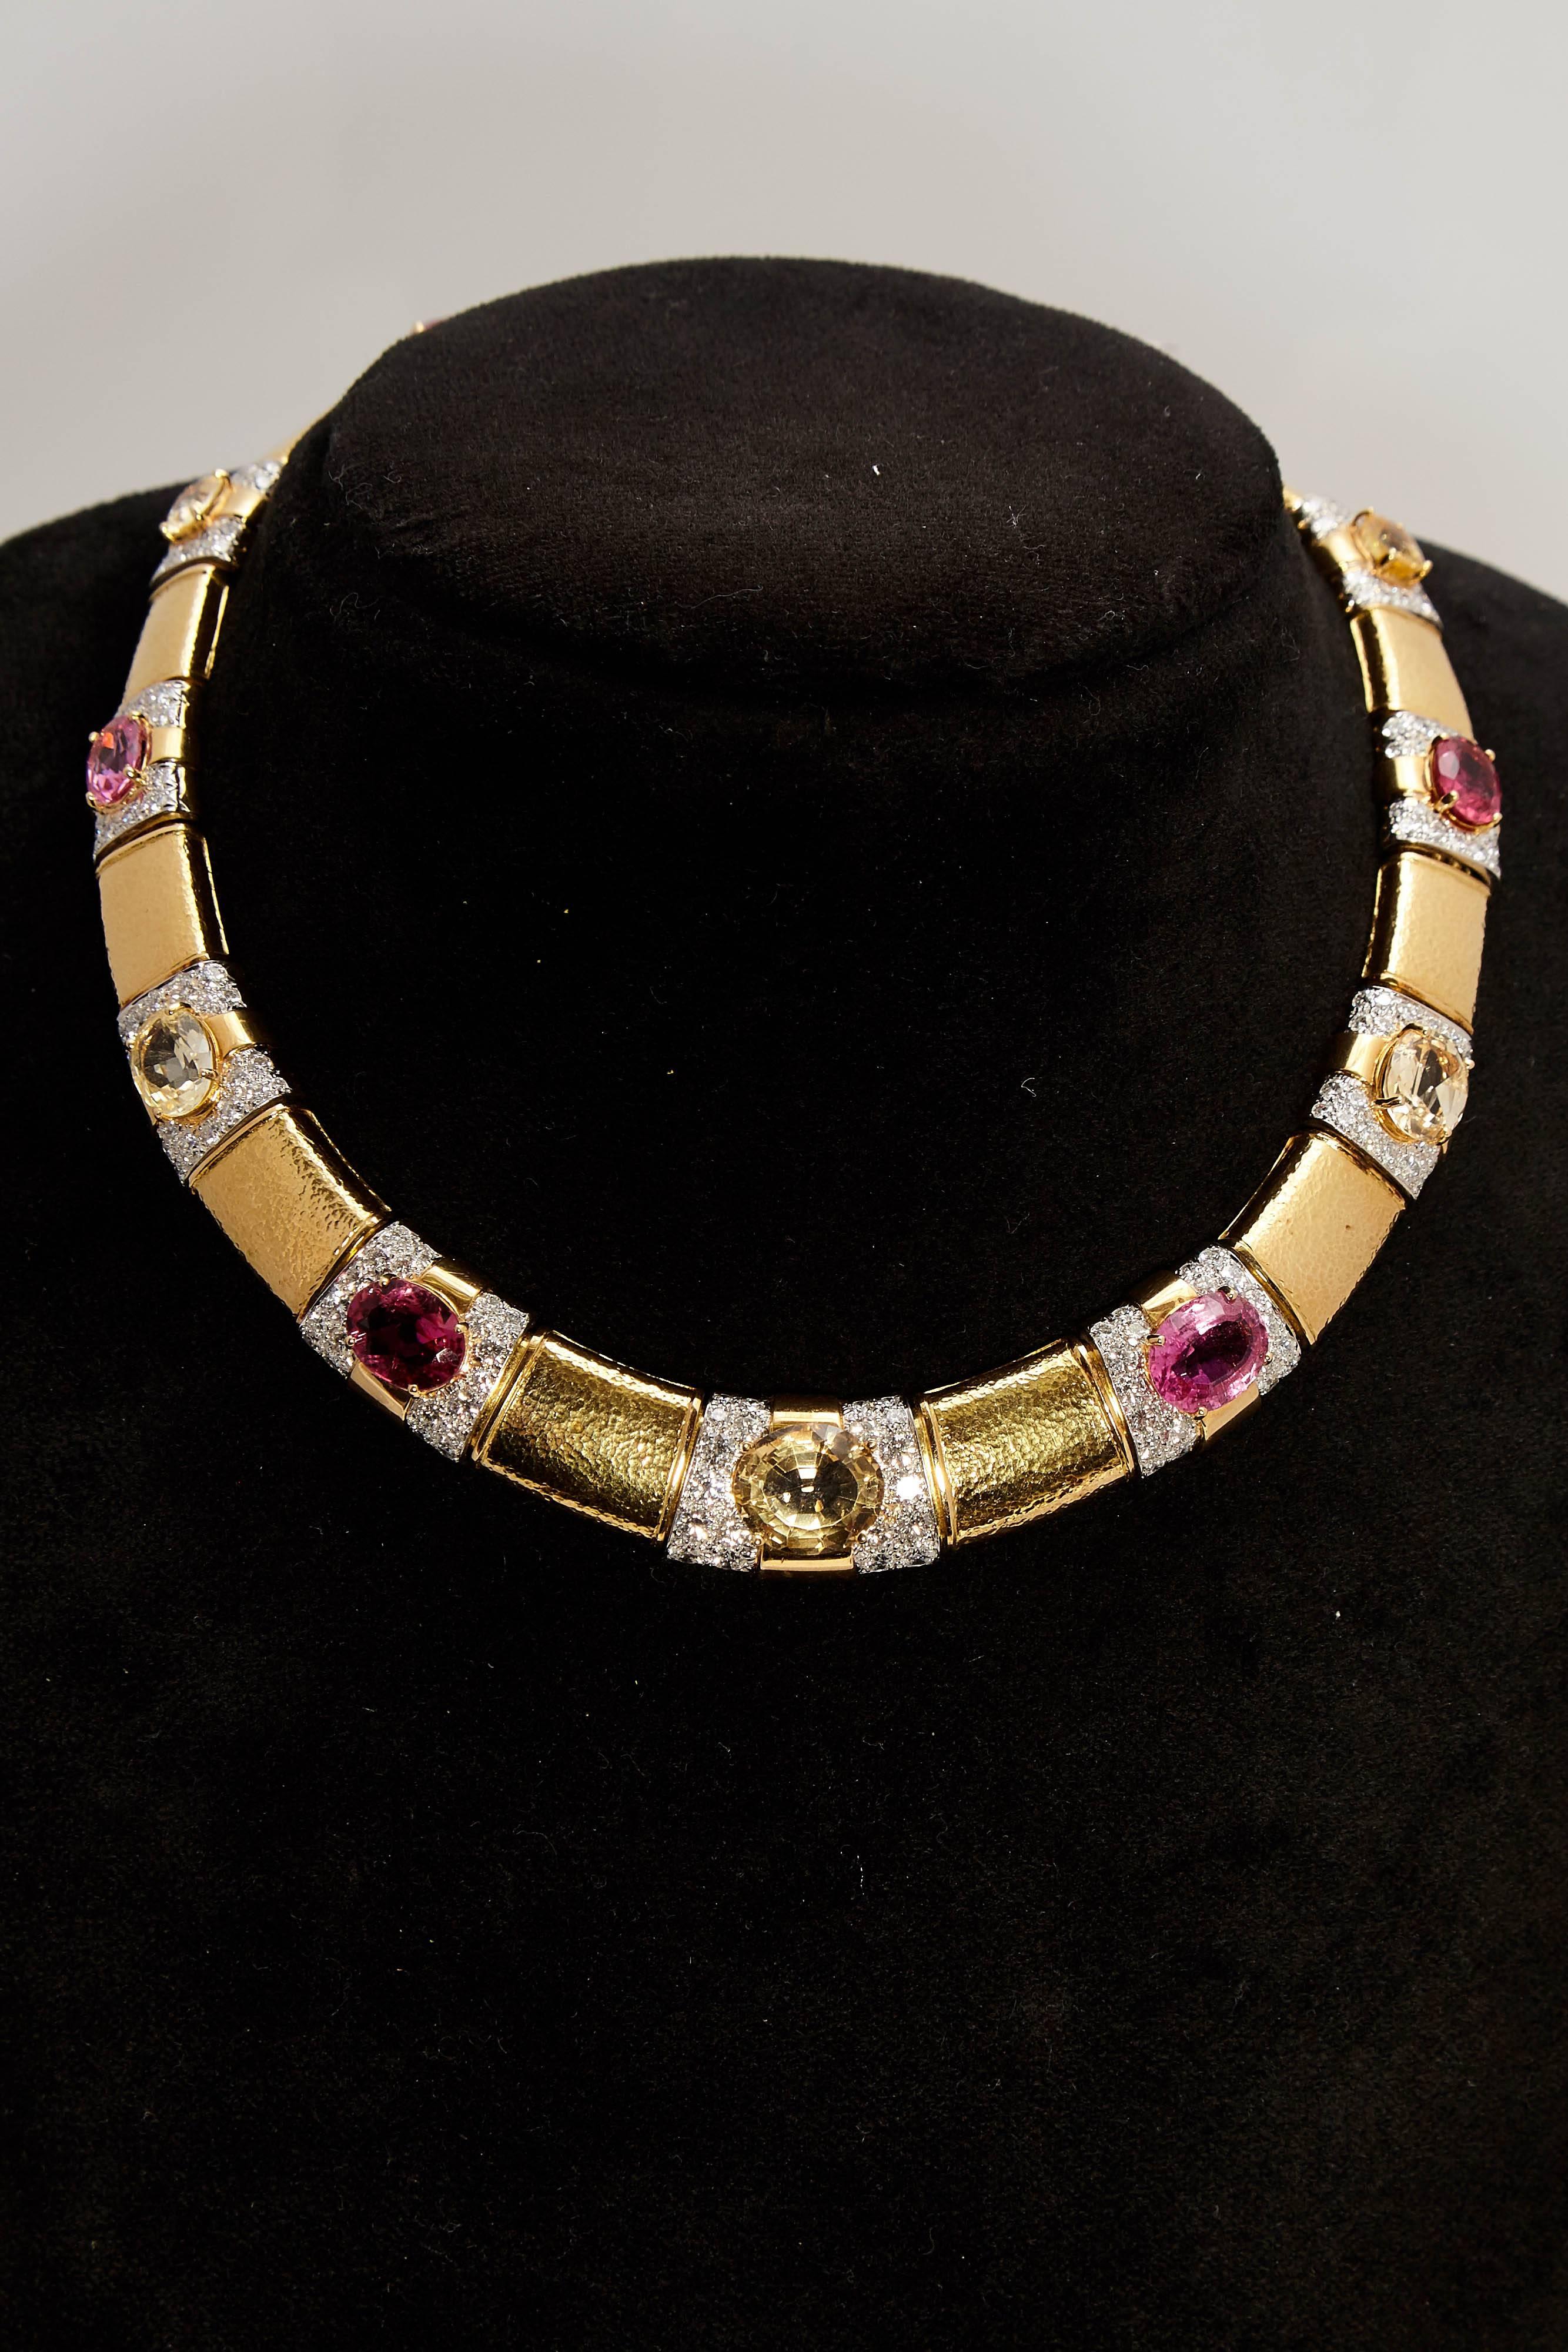 An impressive pink and yellow sapphire necklace, highlighted by brilliant cut diamonds, mounted on 18kt yellow gold. Signed David Webb, circa 1975. 